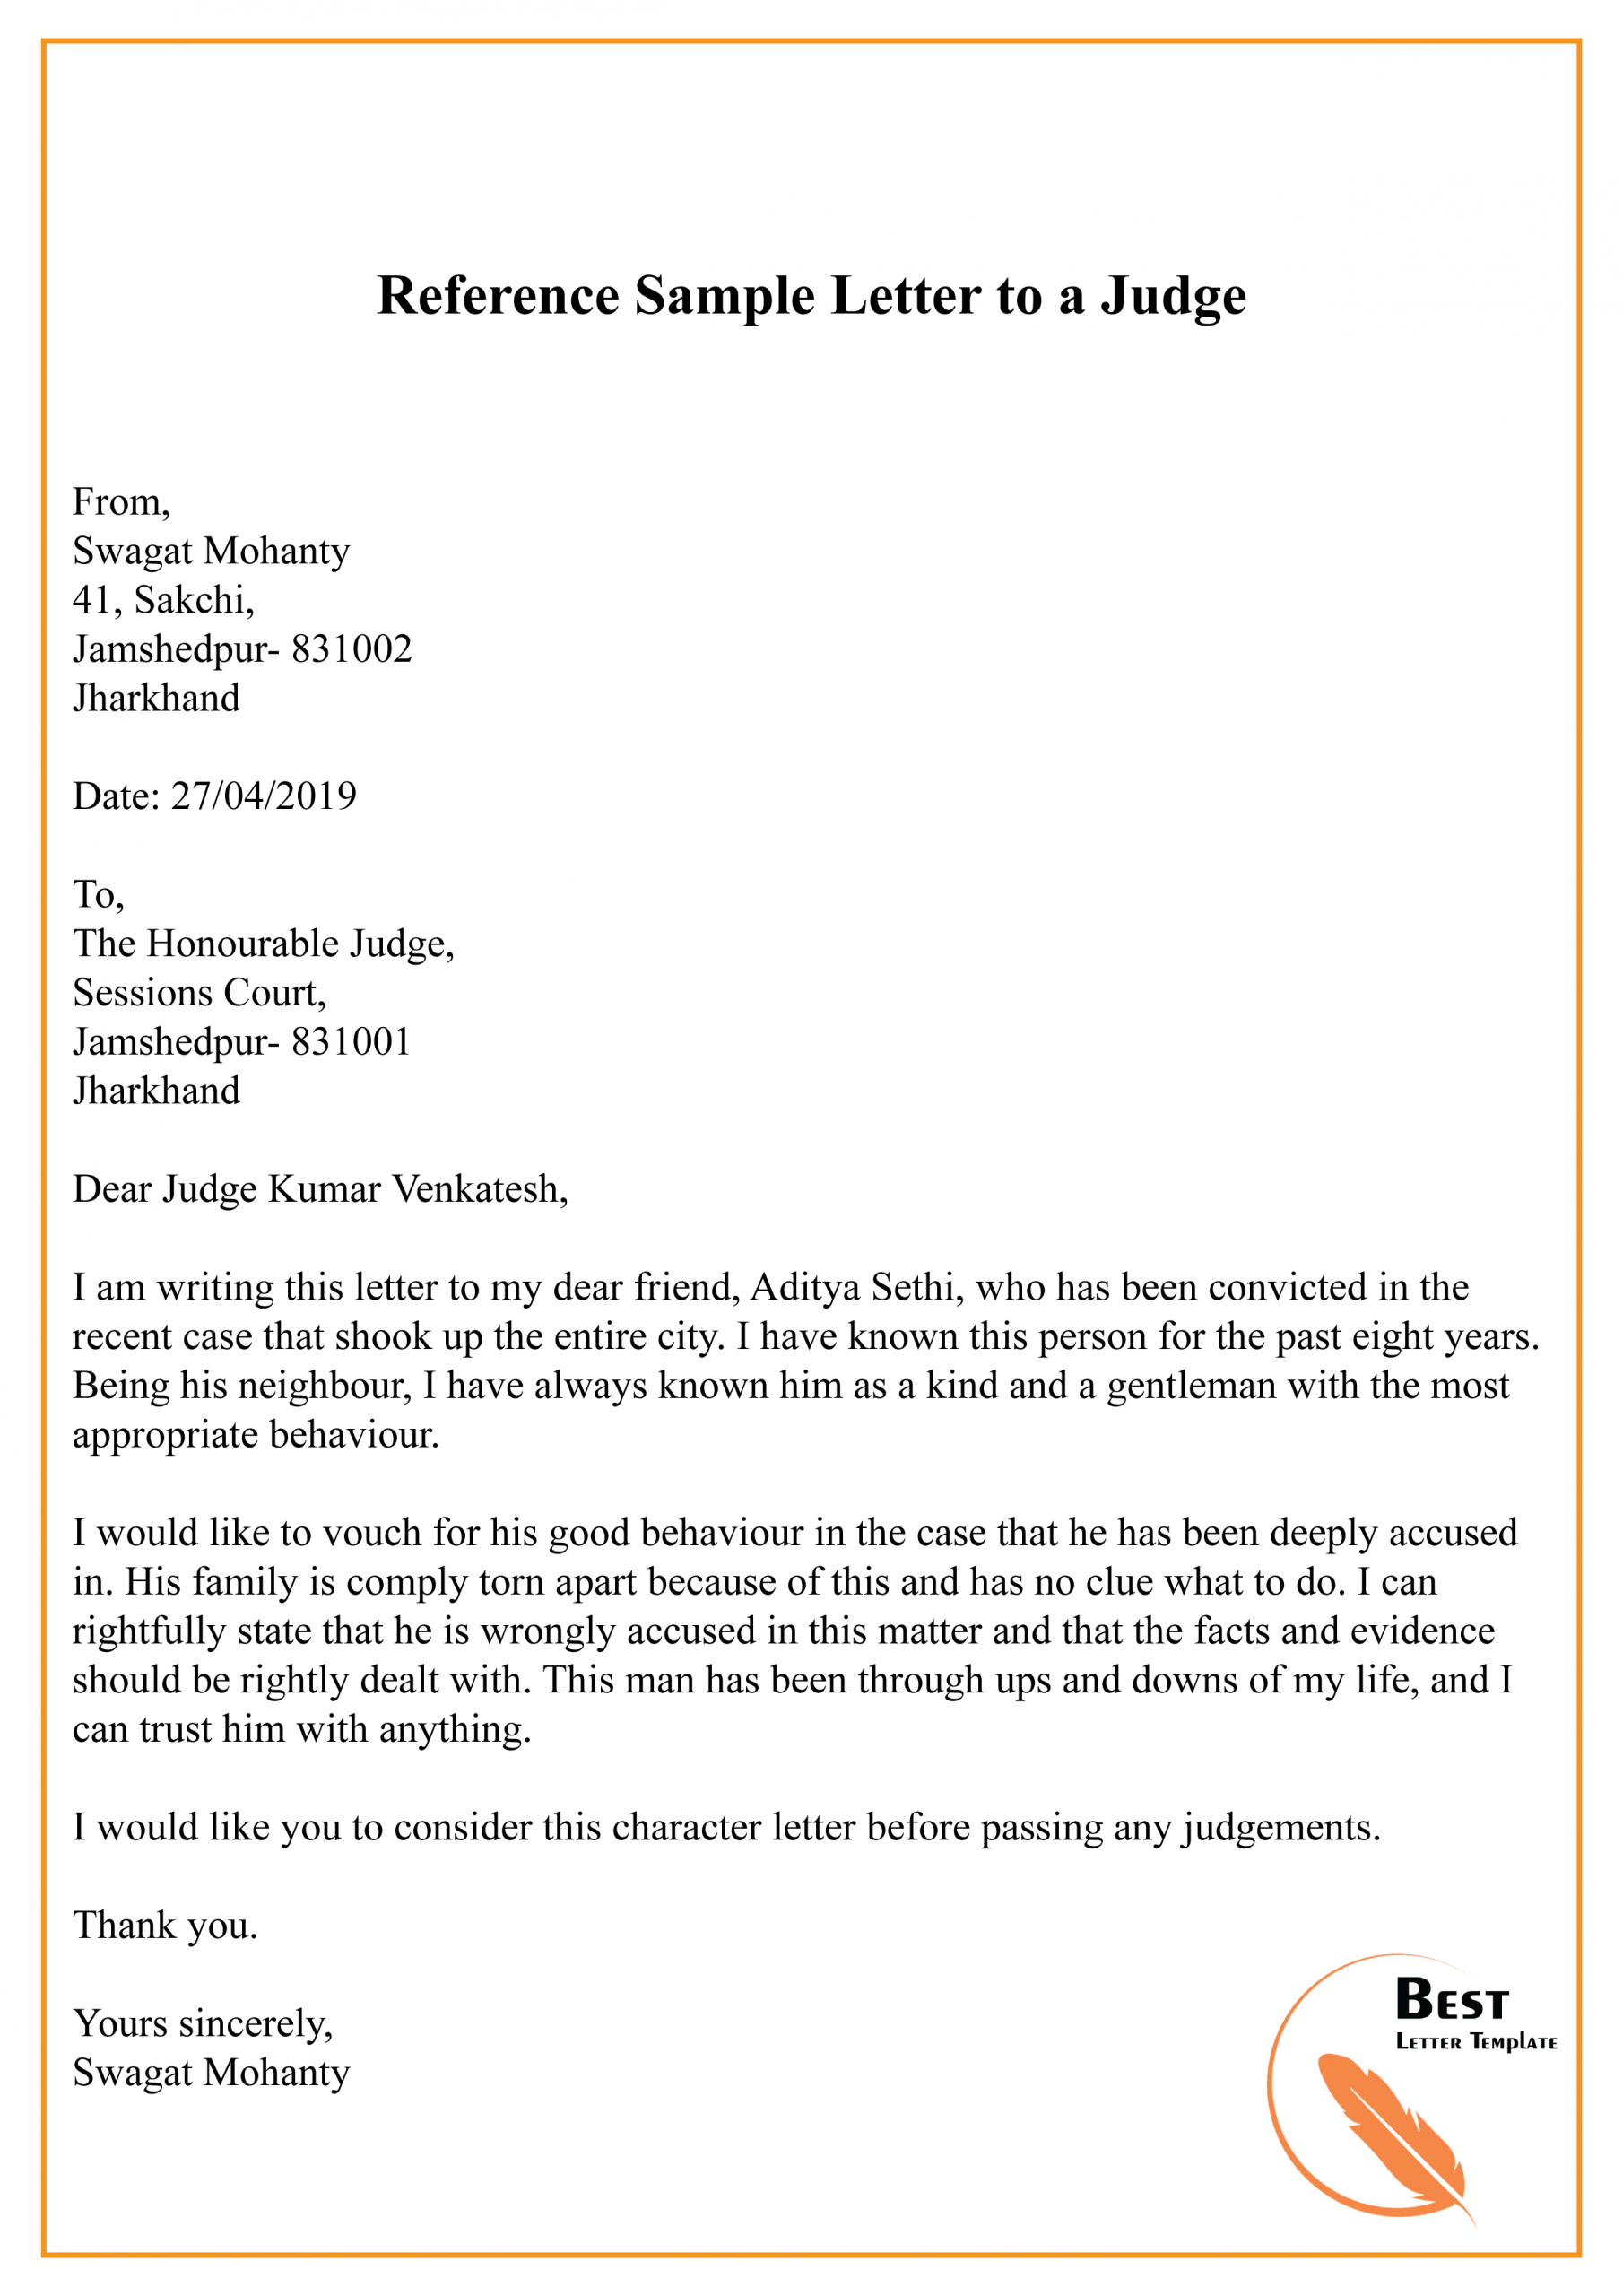 Reference Sample Letter To A Judge 01 Best Letter Template with dimensions 2480 X 3508